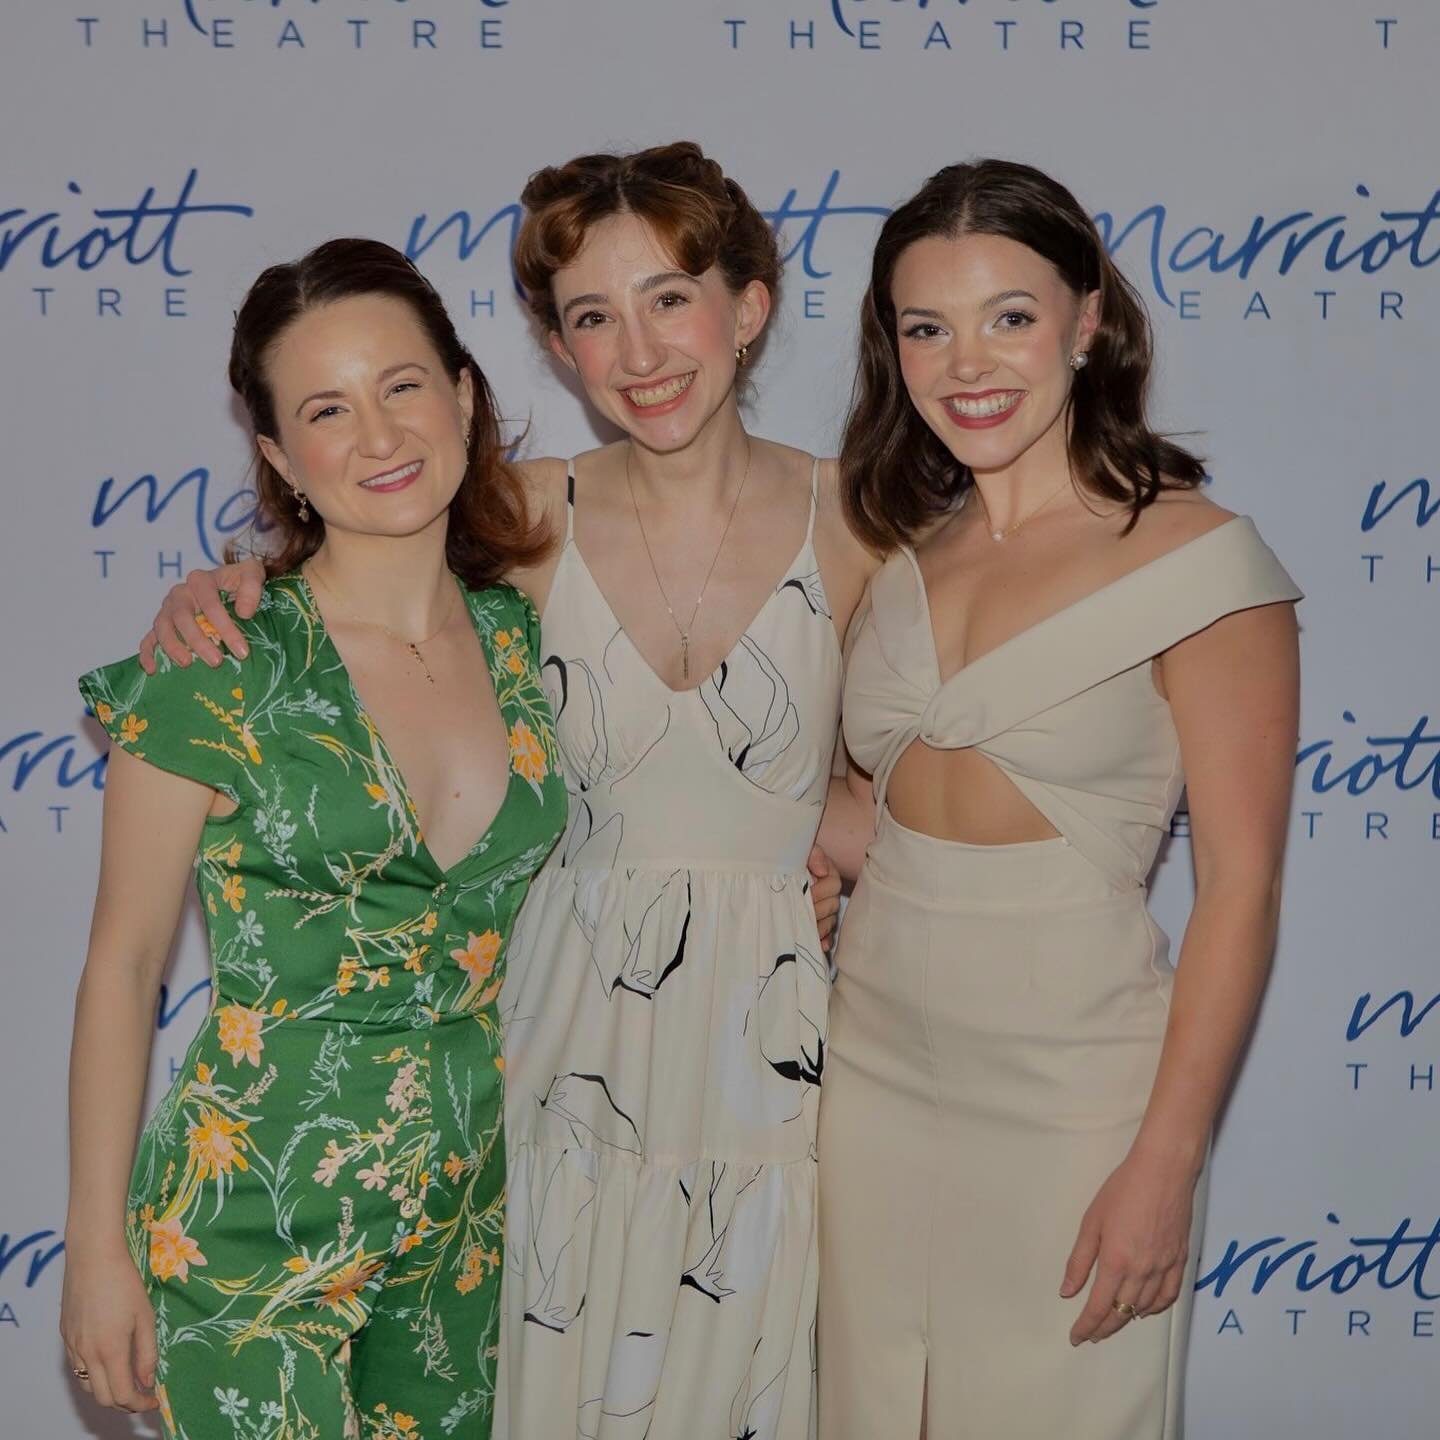 The motht thcrumpthyuth tholid gold cast you ever thaw!
&bull;
&bull;
&bull;
Happy happy opening to this delight of a cast. This process has been a gift and I am so ready to share it with the world. 
Thank you @k8spelman, @kim.c.hudman, @laurarookchi